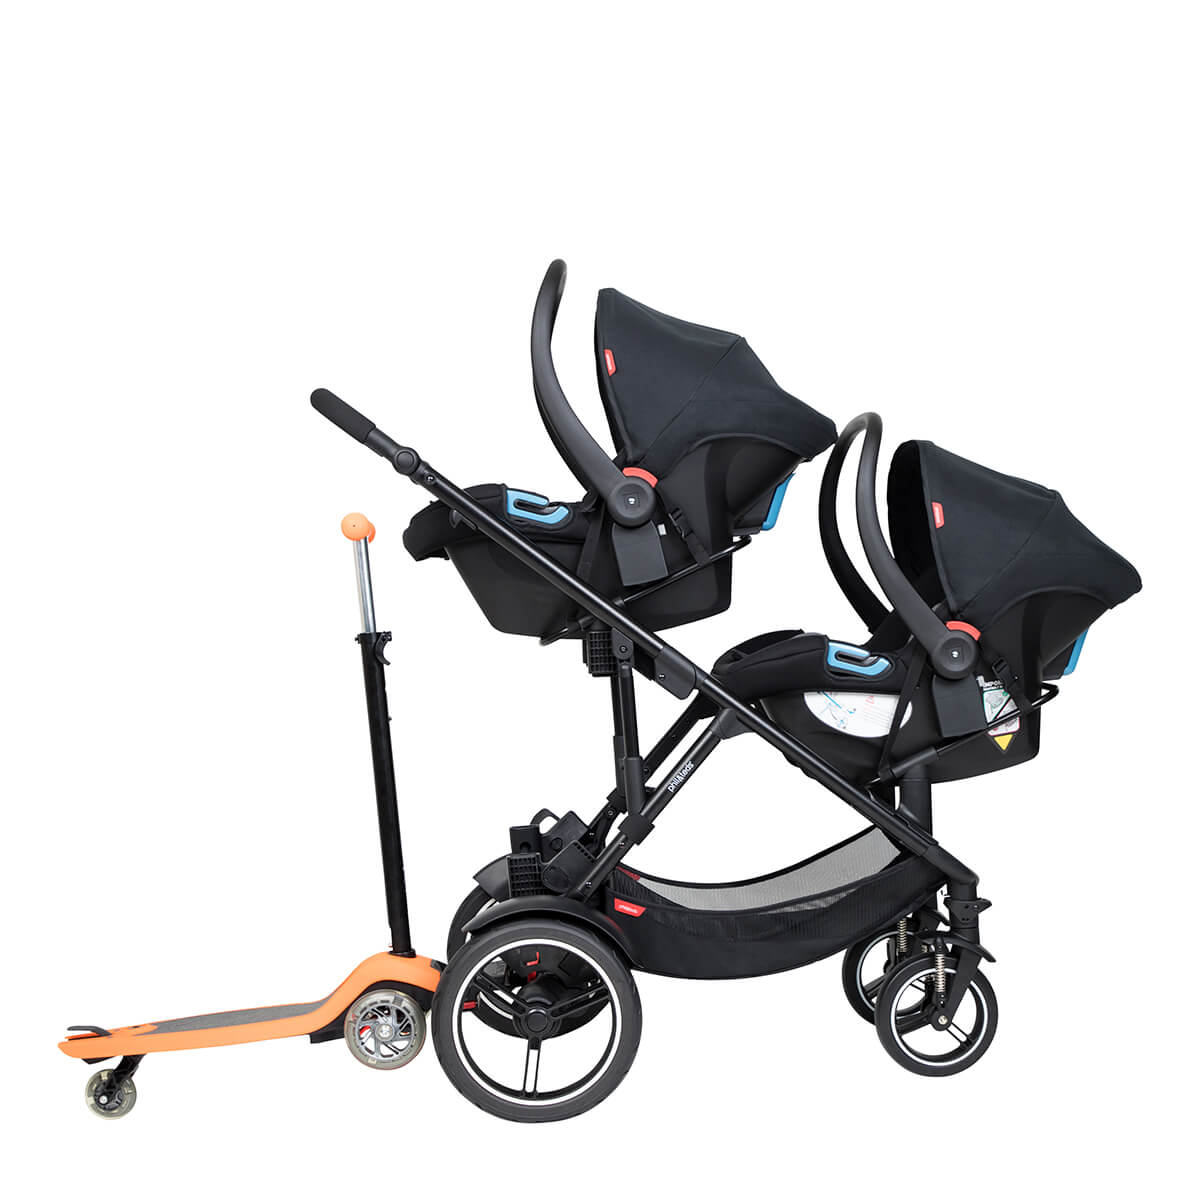 https://cdn.accentuate.io/7344767041720/19440482418872/philteds-voyager-buggy-with-double-travel-systems-and-freerider-stroller-board-in-the-rear-v1700697808178.jpg?1200x1200